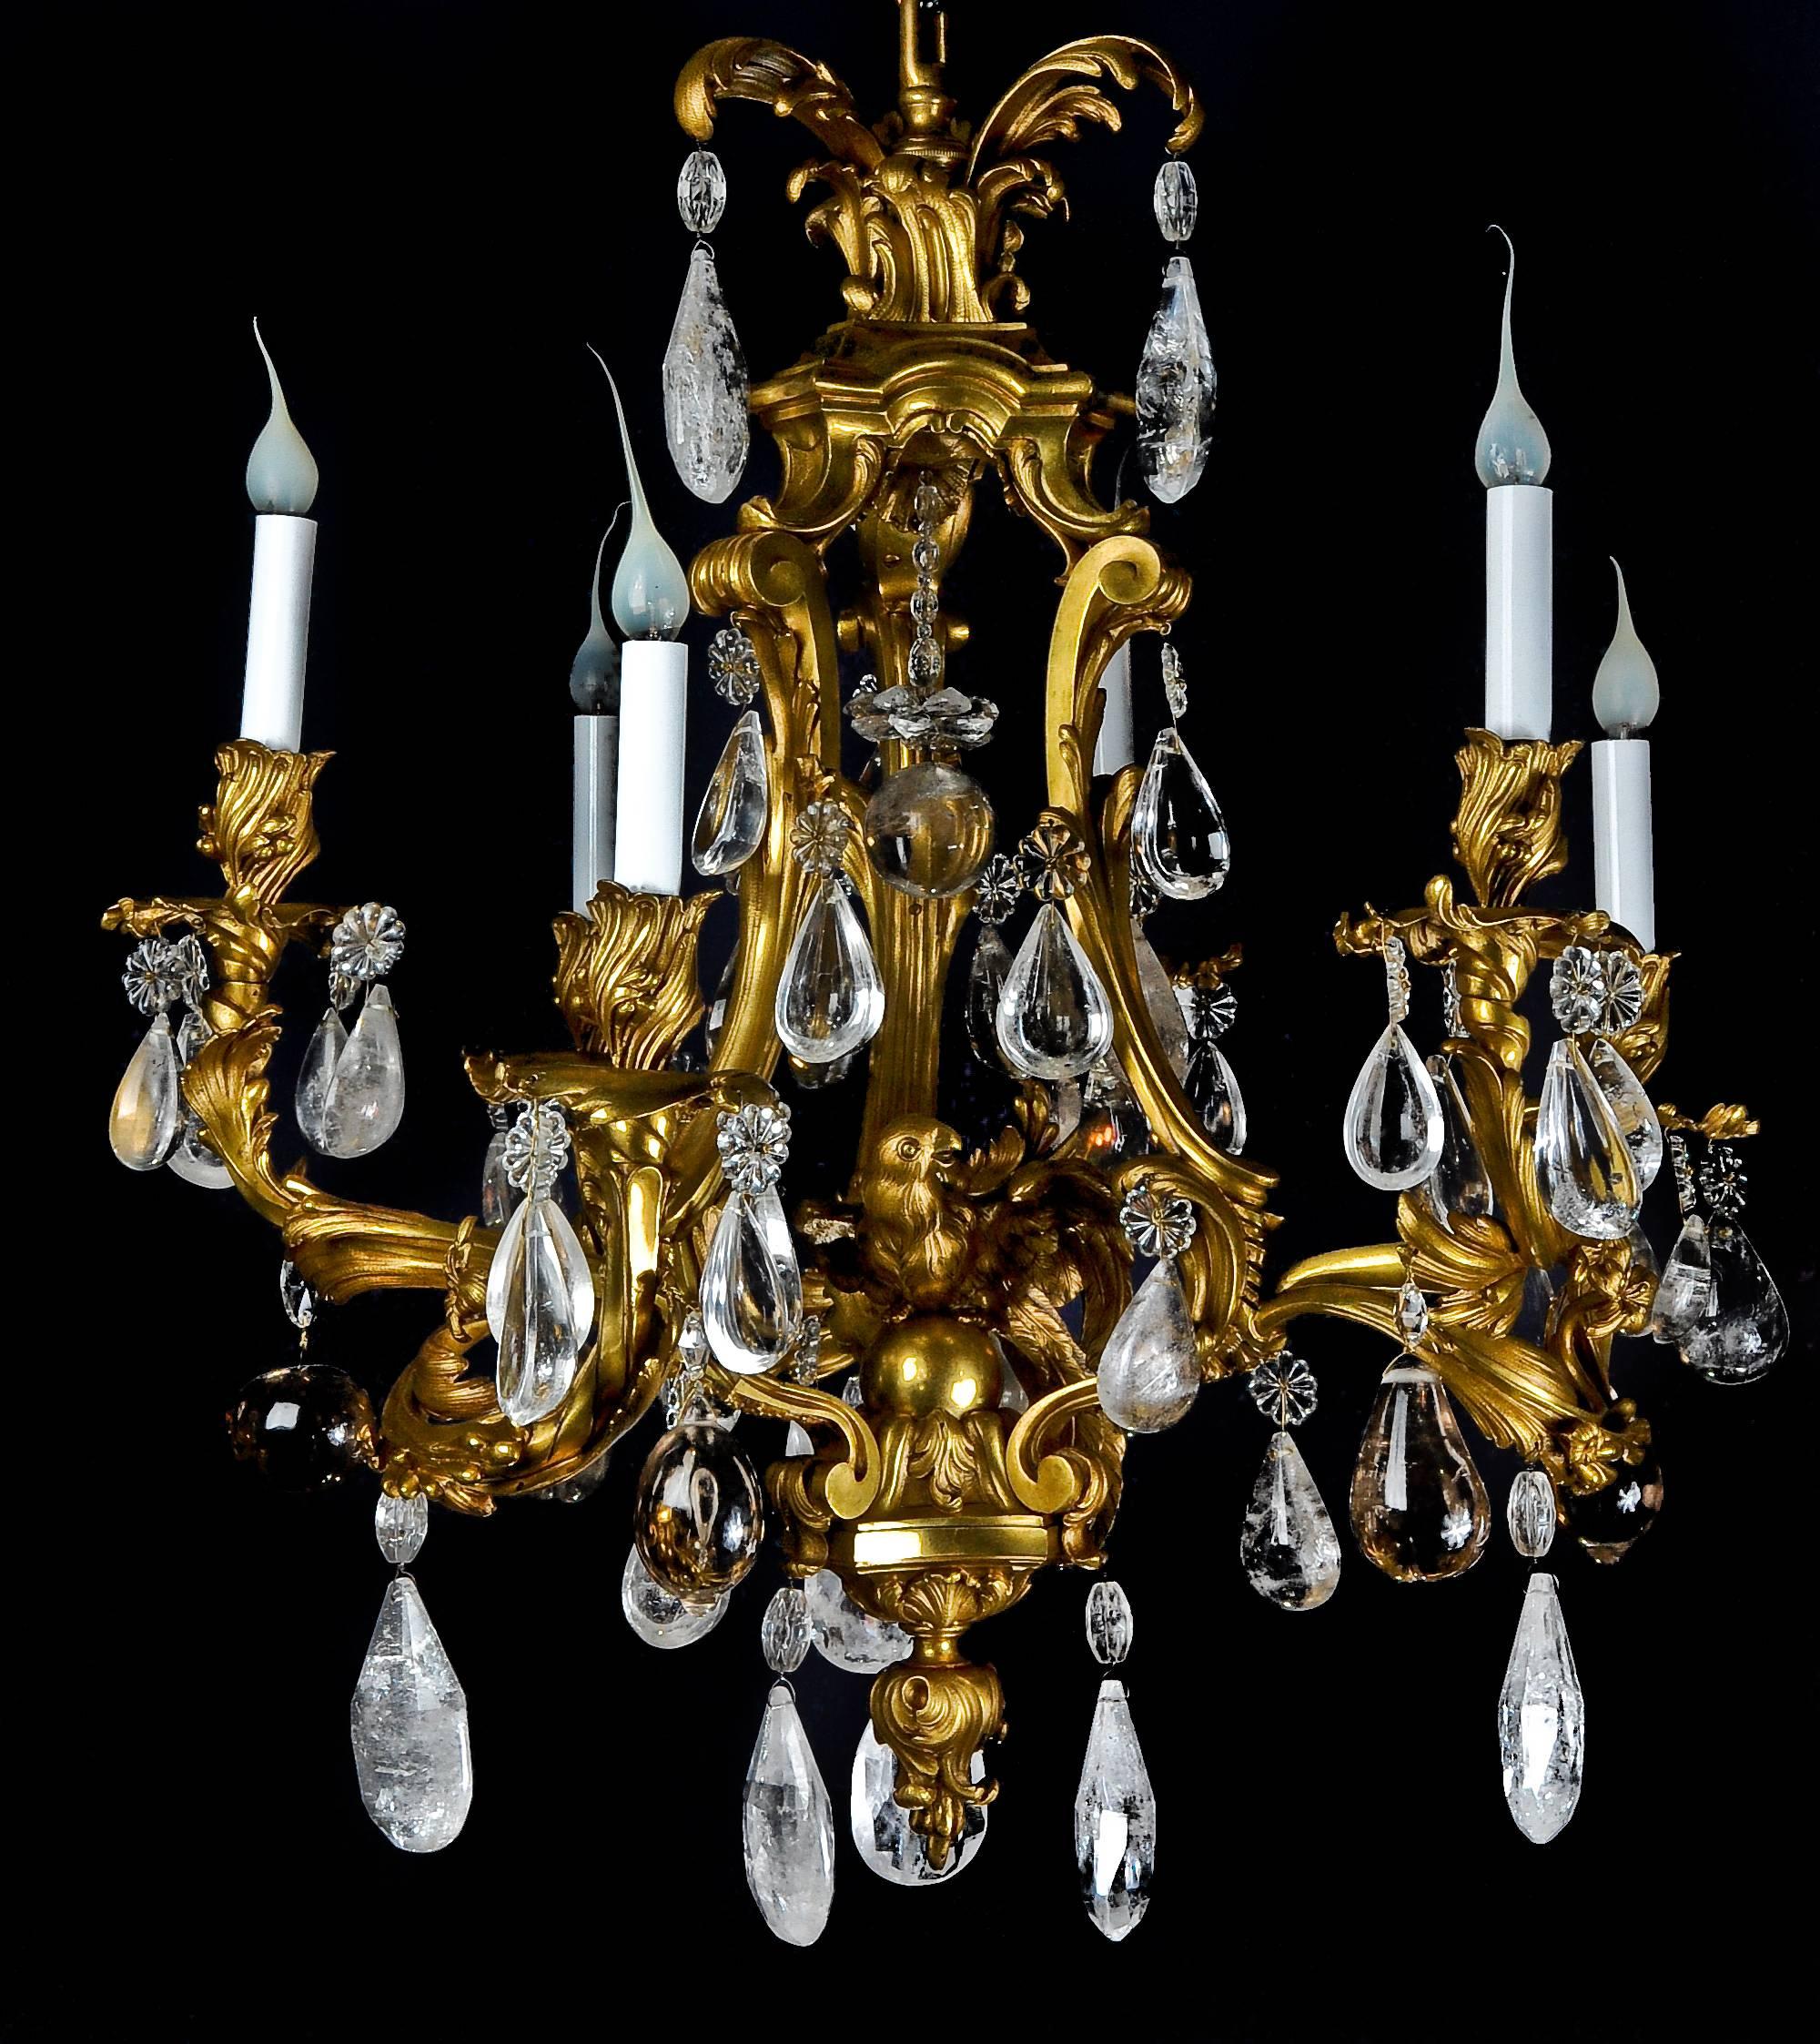 An antique French Louis XVI style gilt bronze and cut rock crystal multi light cage form chandelier of fine detail embellished with a central gilt bronze parrot and further embellished with fine rock crystal prisms.